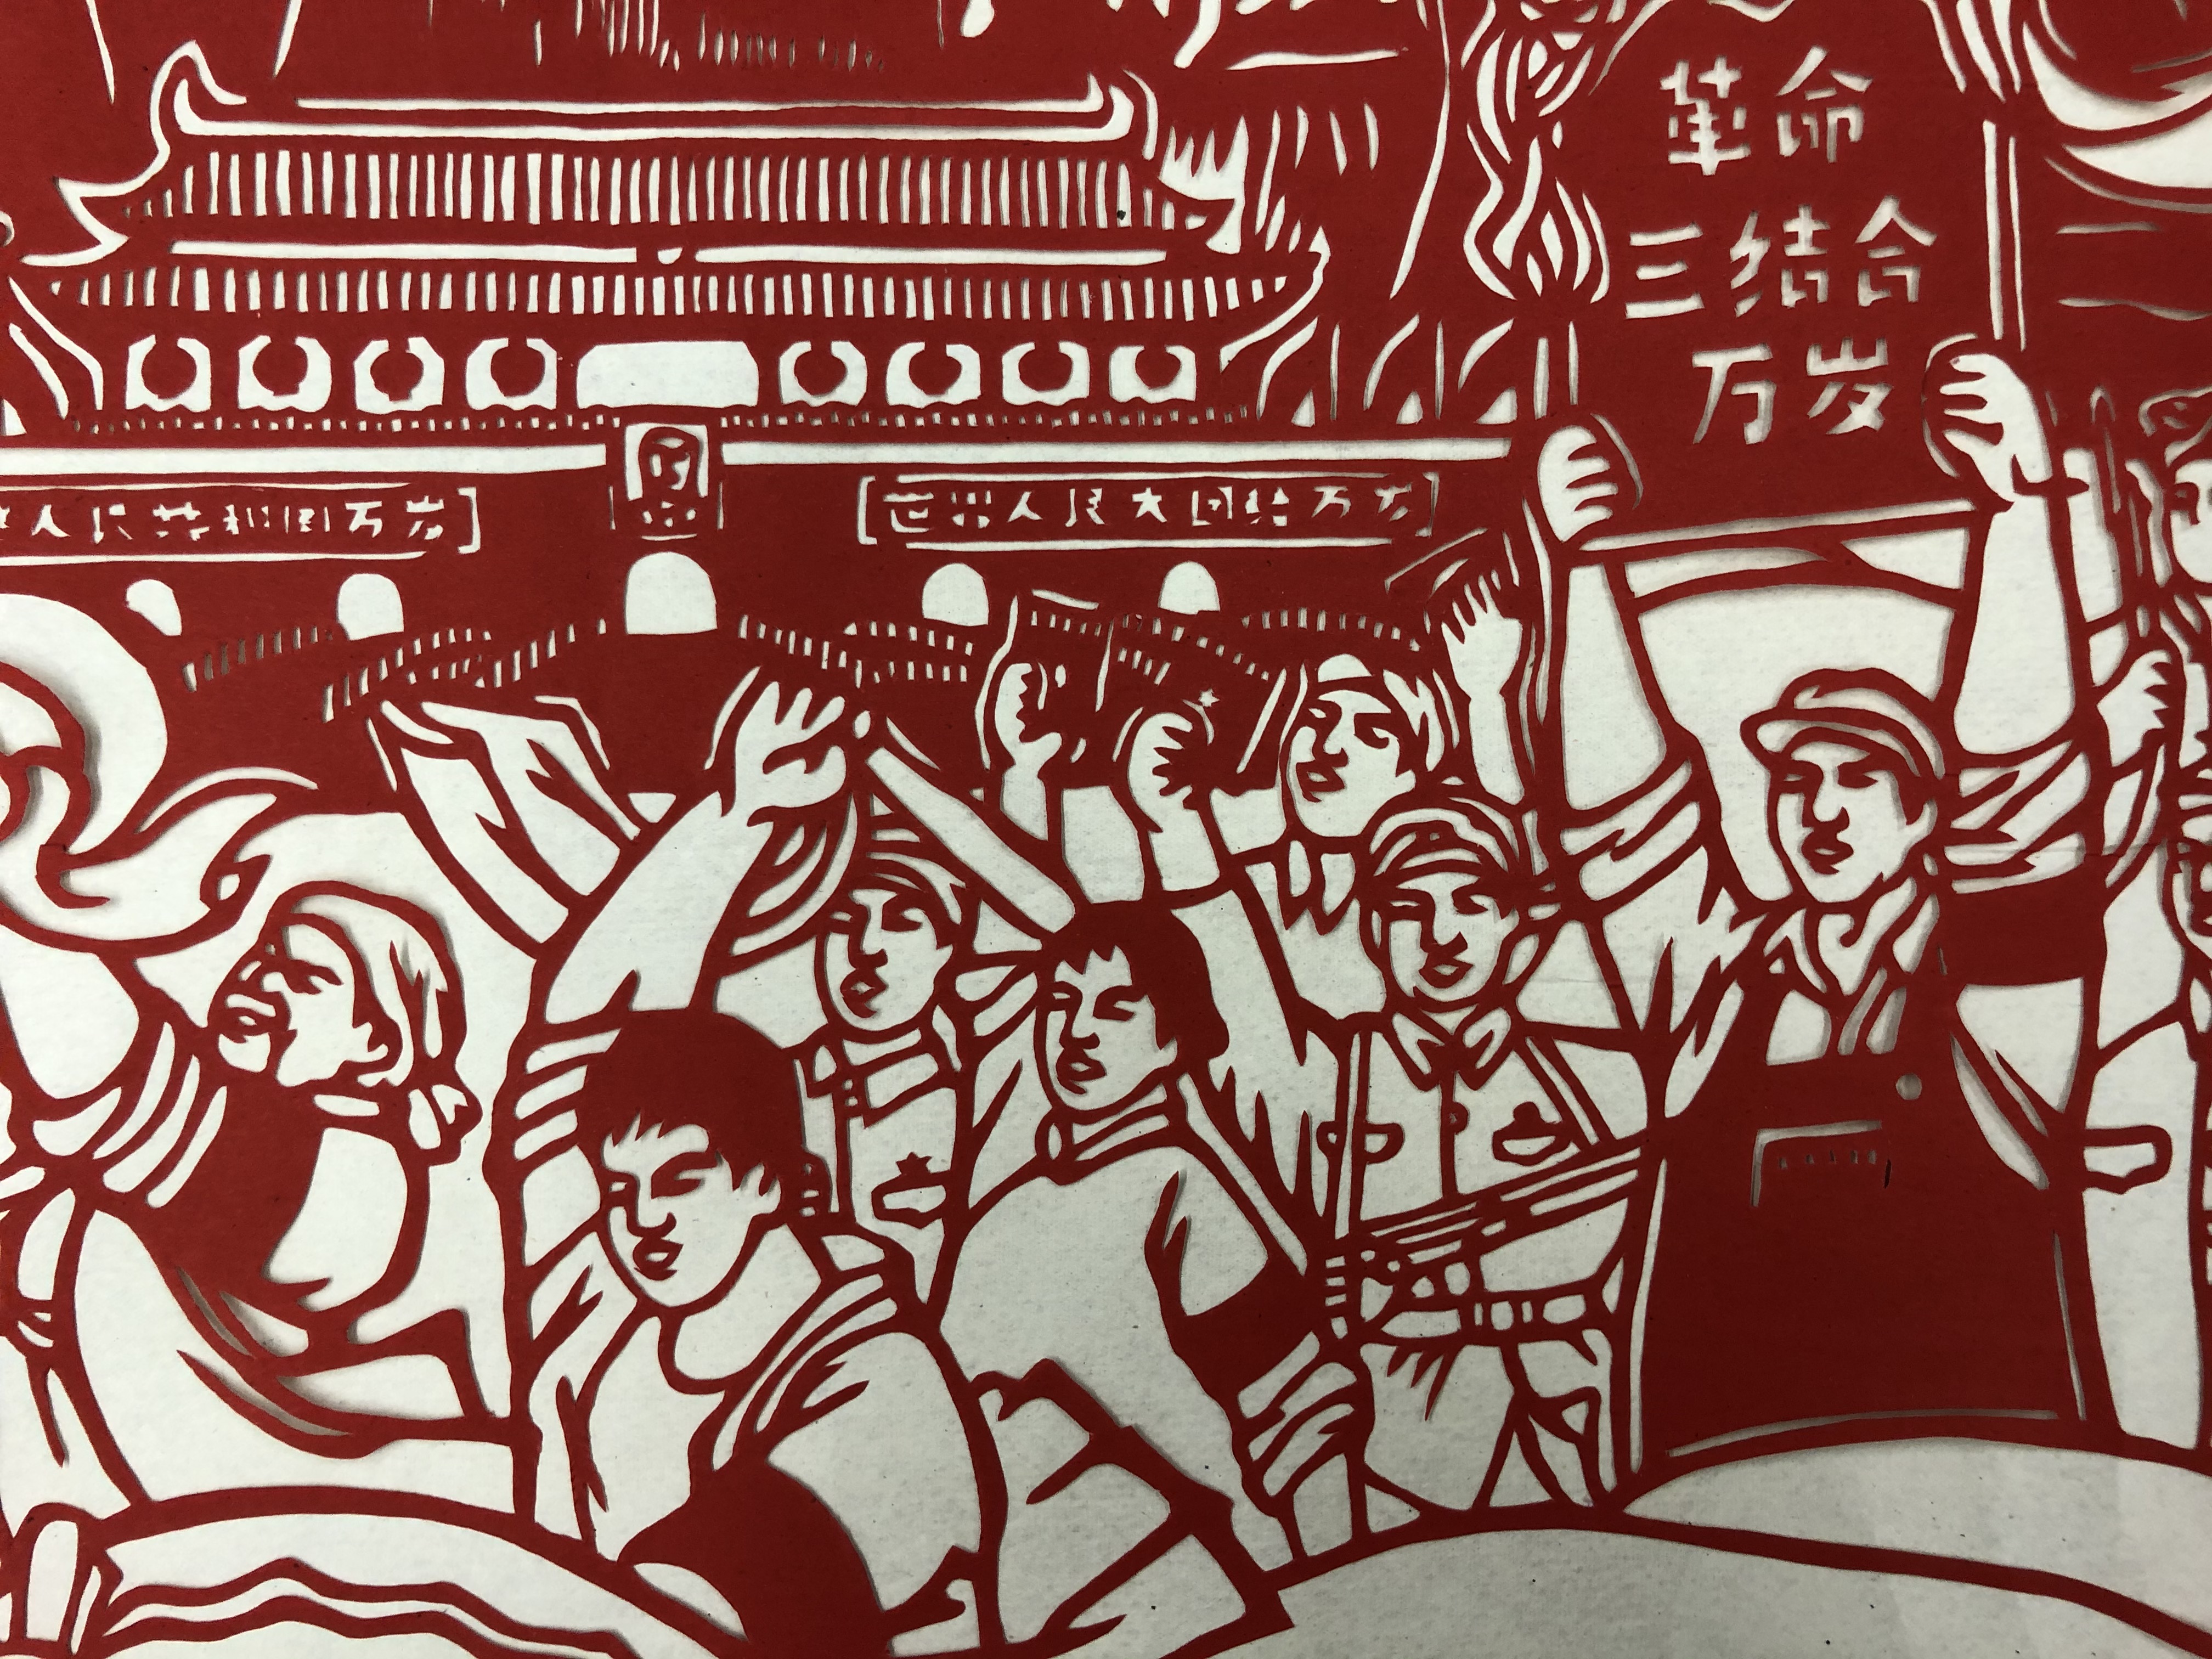 papercut post in red and white depicting a group of men and women marching in the street, some holding banners aloft